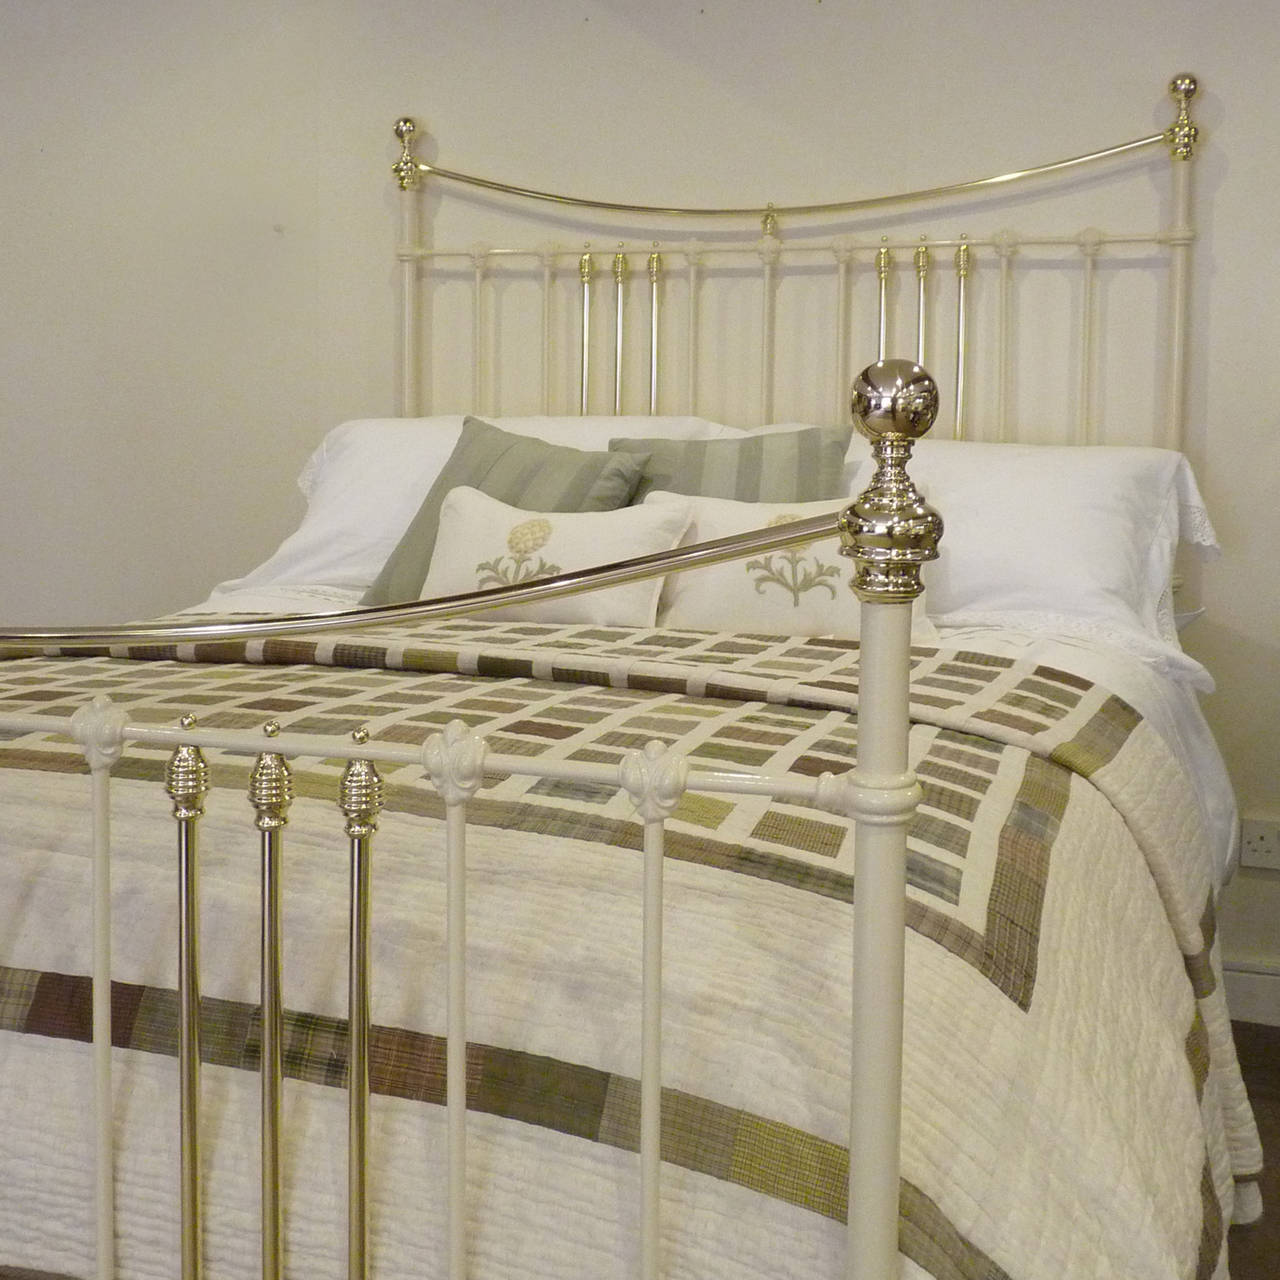 This fine example of an antique bedstead has been restored from an original Victorian frame.

The bed accepts a British King Size or American Queen Size base and mattress (60 in wide).

The price is for the bedstead frame alone, the base,